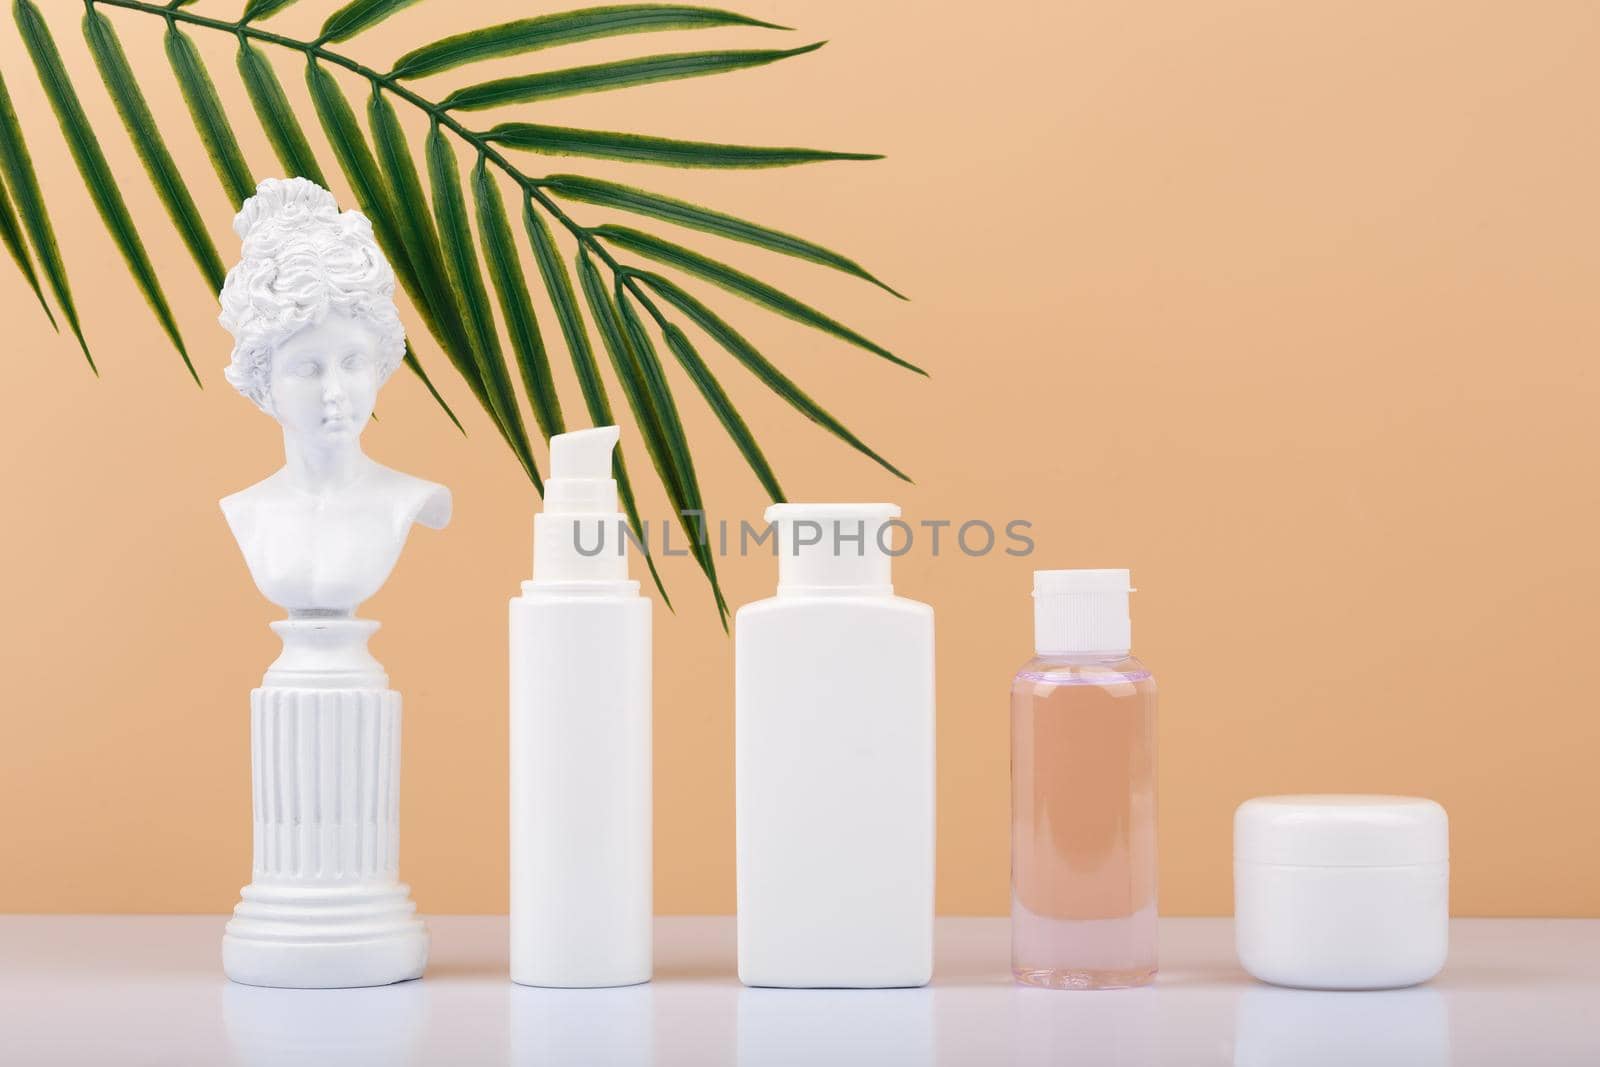 Set of skin care products with gypsum figure of a woman on white table against beige background with palm leaf. Face cream, lotion, tonic and under eye gel. Products for daily skin care